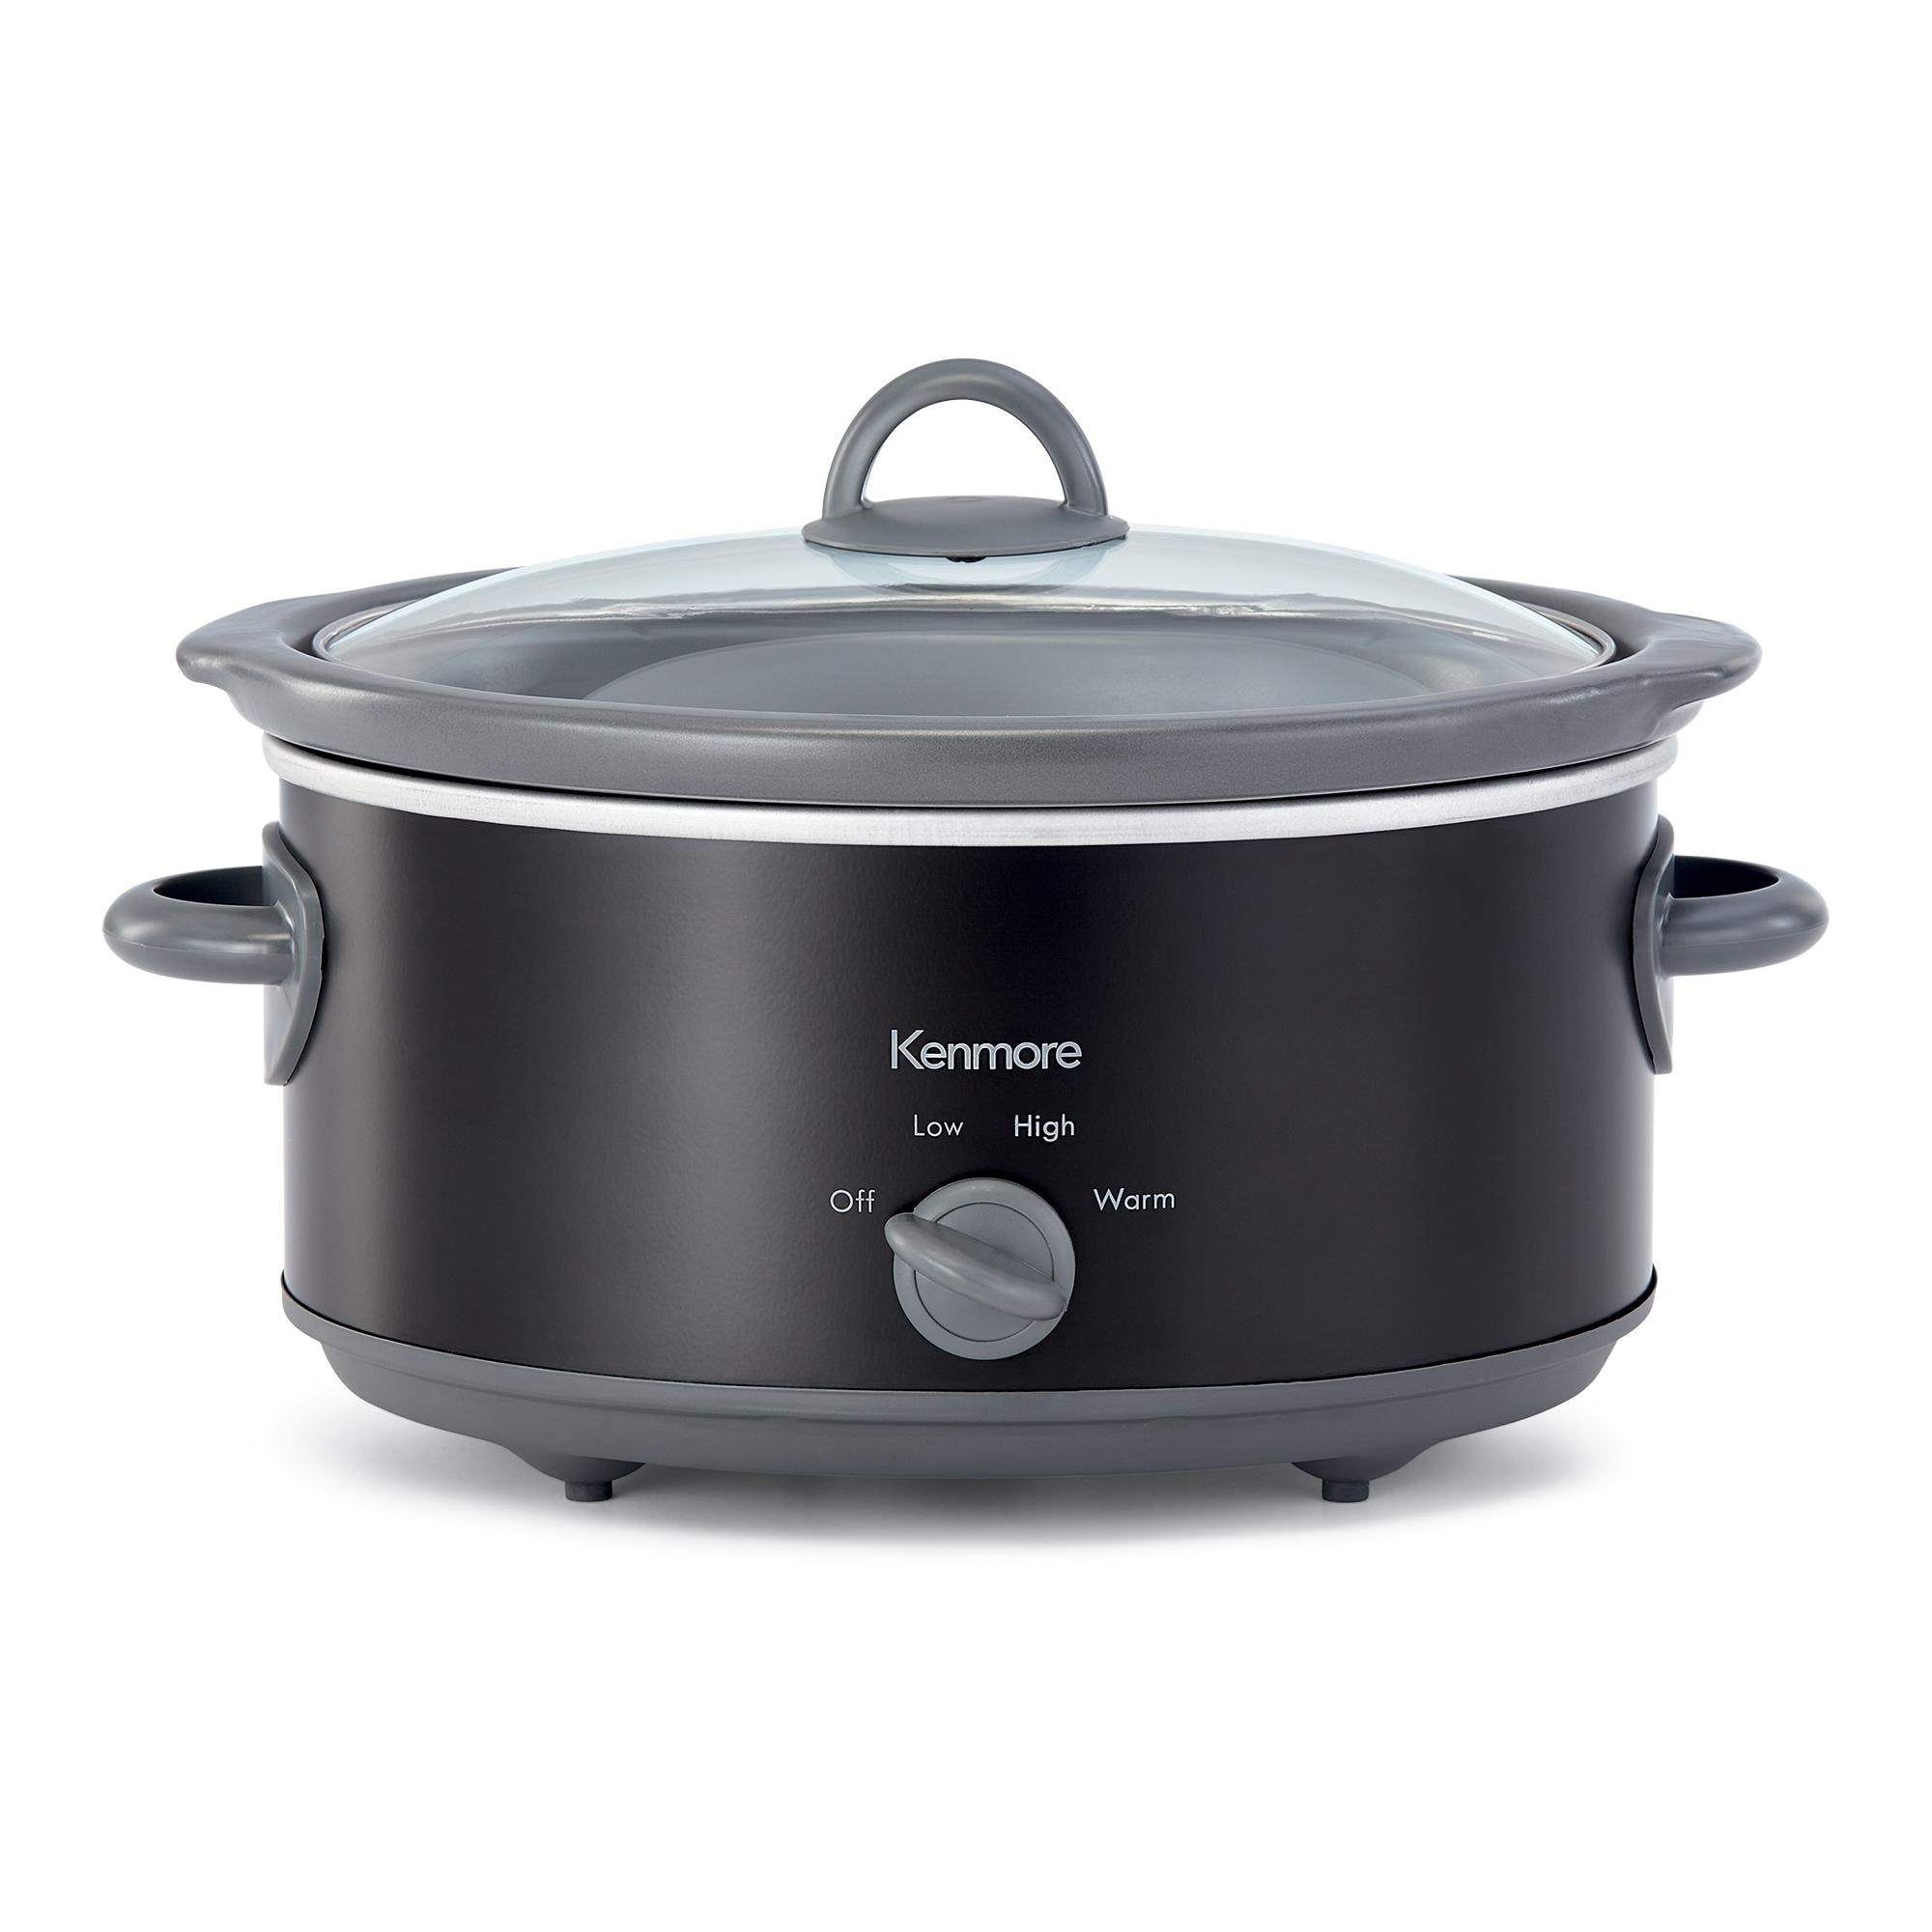 Kenmore 5 qt (4.7L) Slow Cooker, Black and Gray, Compact Countertop Cooking, Simple Dial Control